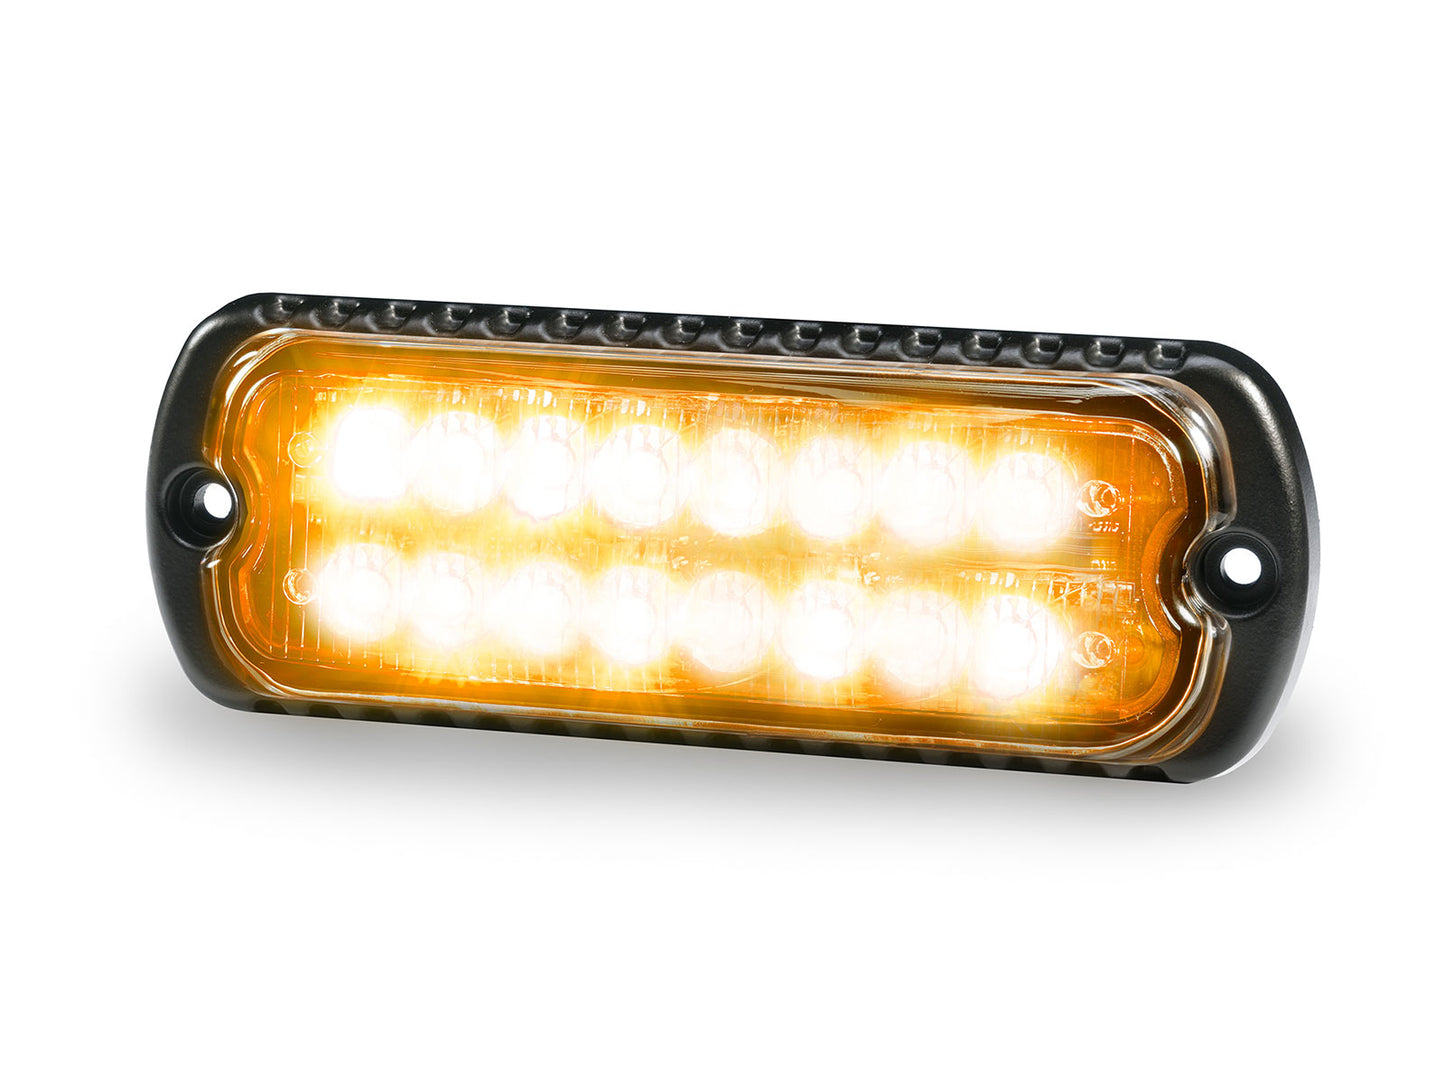 Standby L52 2C two-tone LED flasher